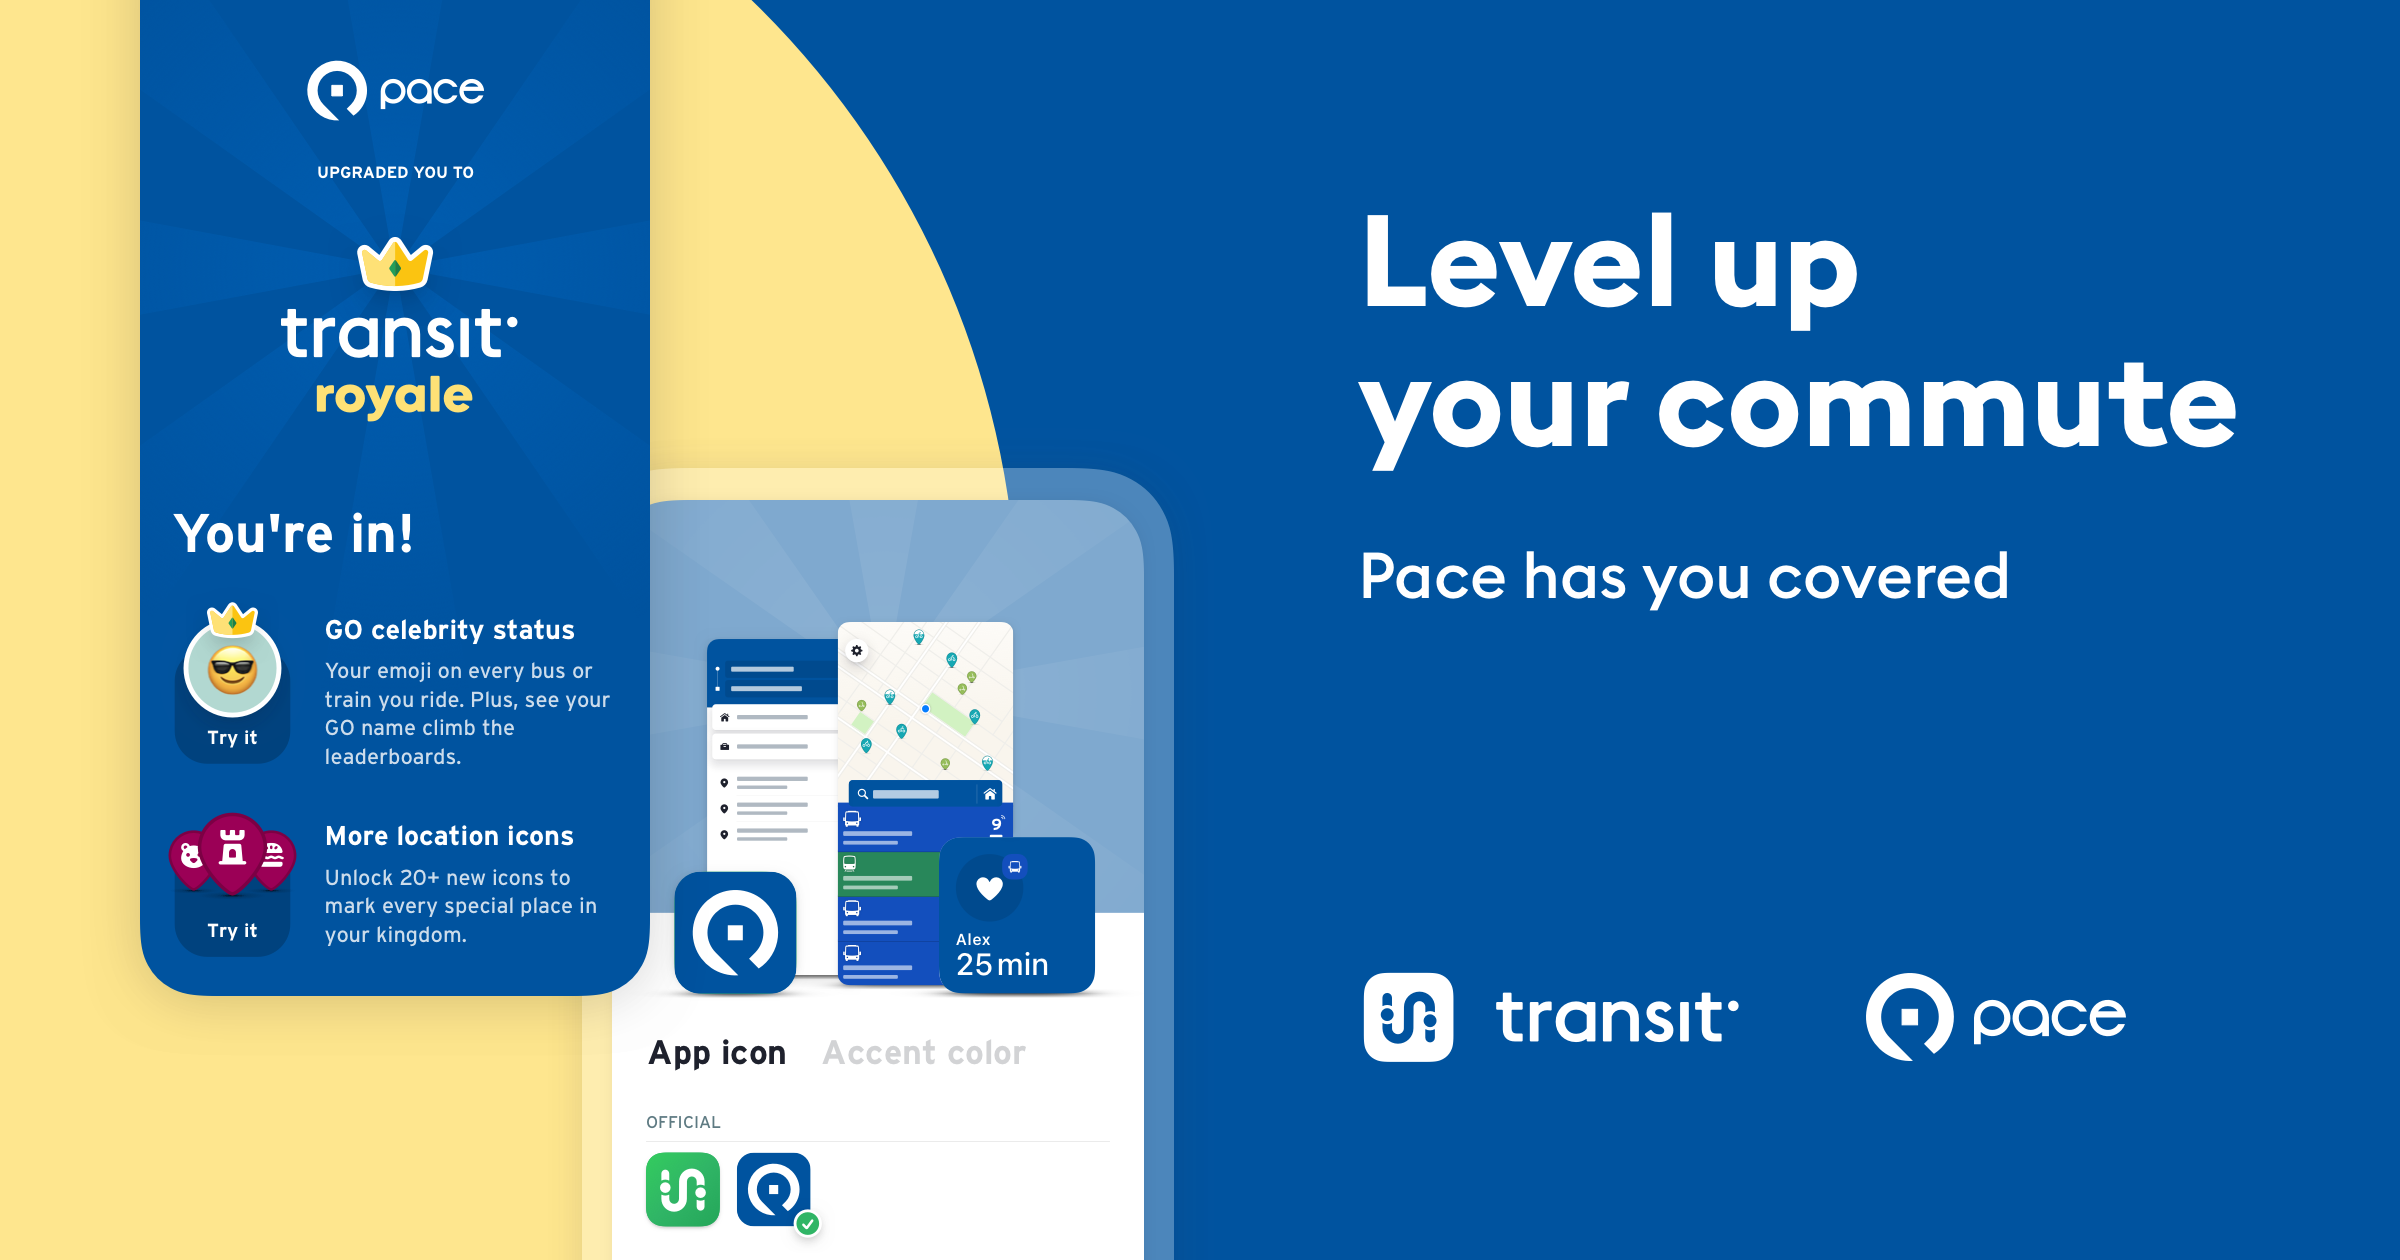 Transit app smartphone imagery with a "Level up your commute" headline